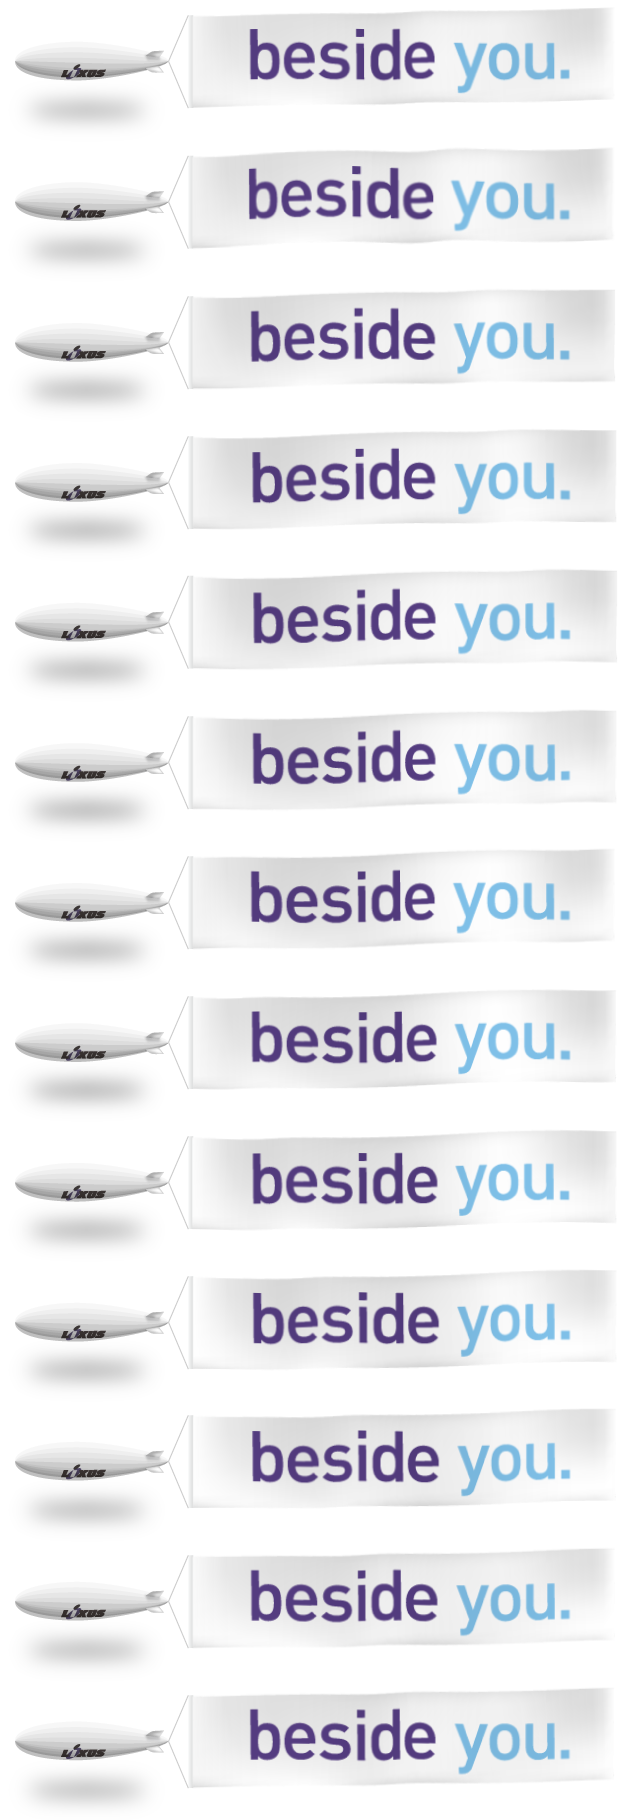 beside you.